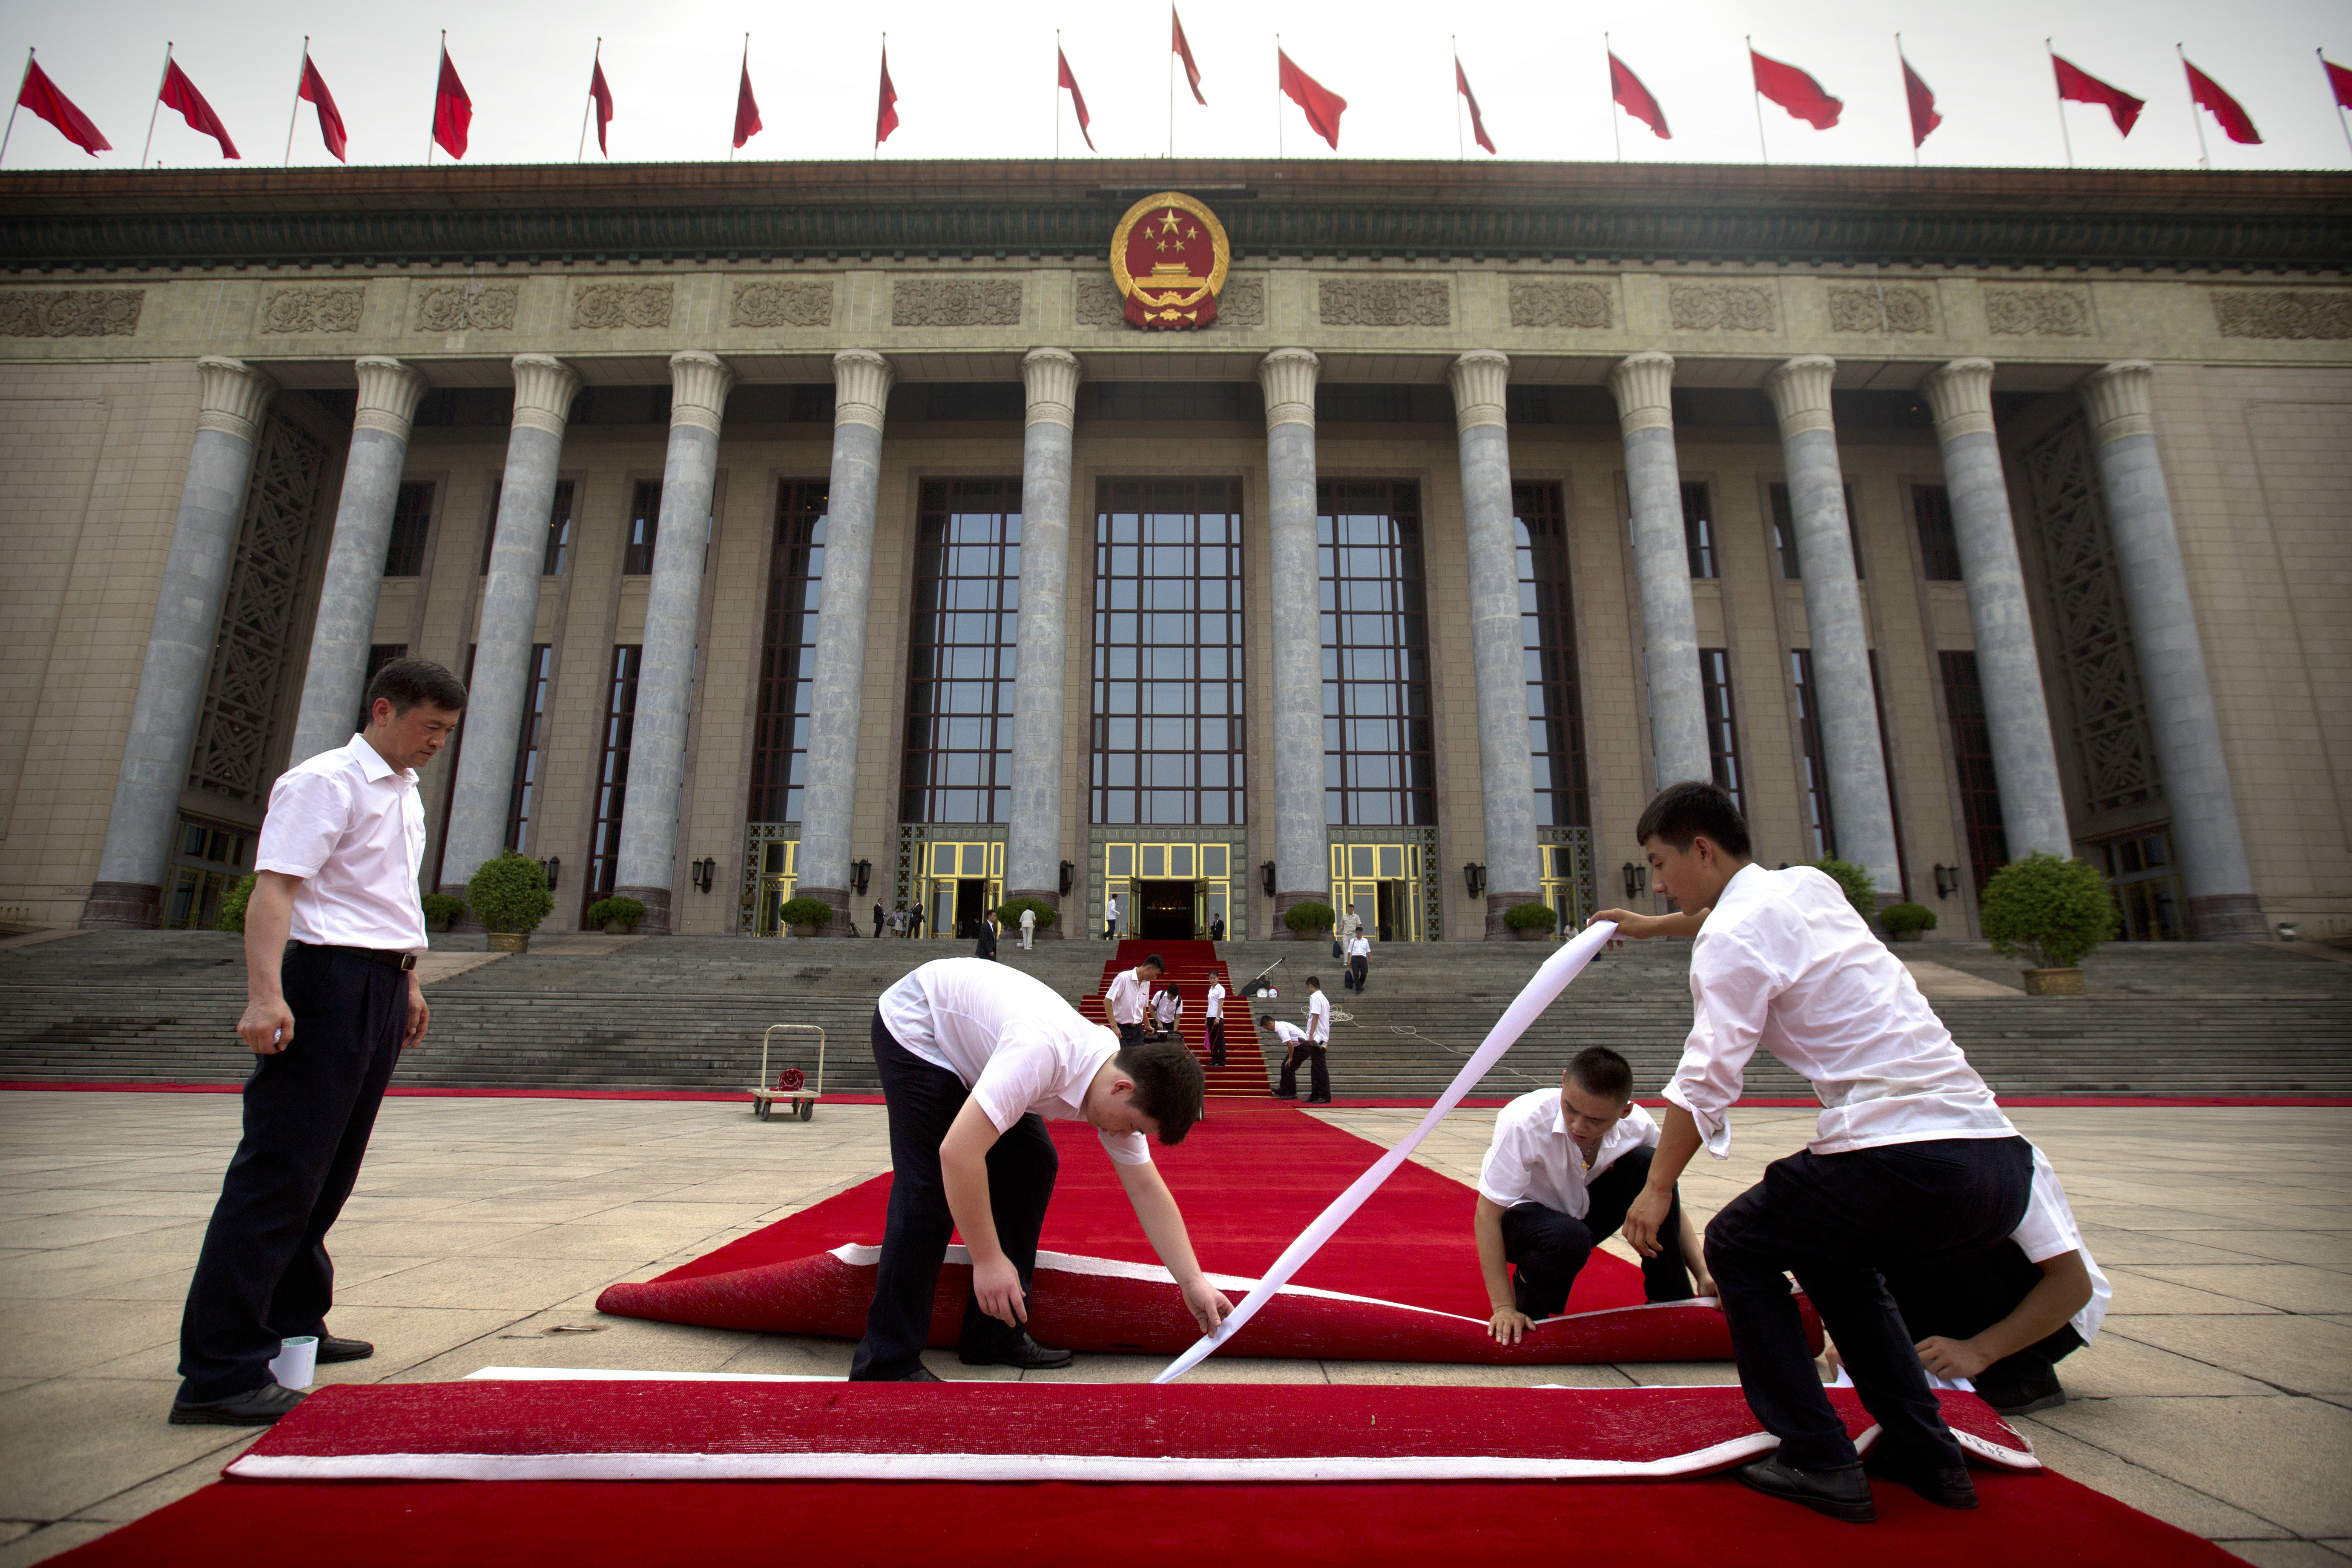 Workers use strips of adhesive tape as they lay down a red carpet in front of the Great Hall of the People before a welcome ceremony for Palestinian President Mahmoud Abbas in Beijing, Tuesday, July 18, 2017. (AP Photo/Mark Schiefelbein)